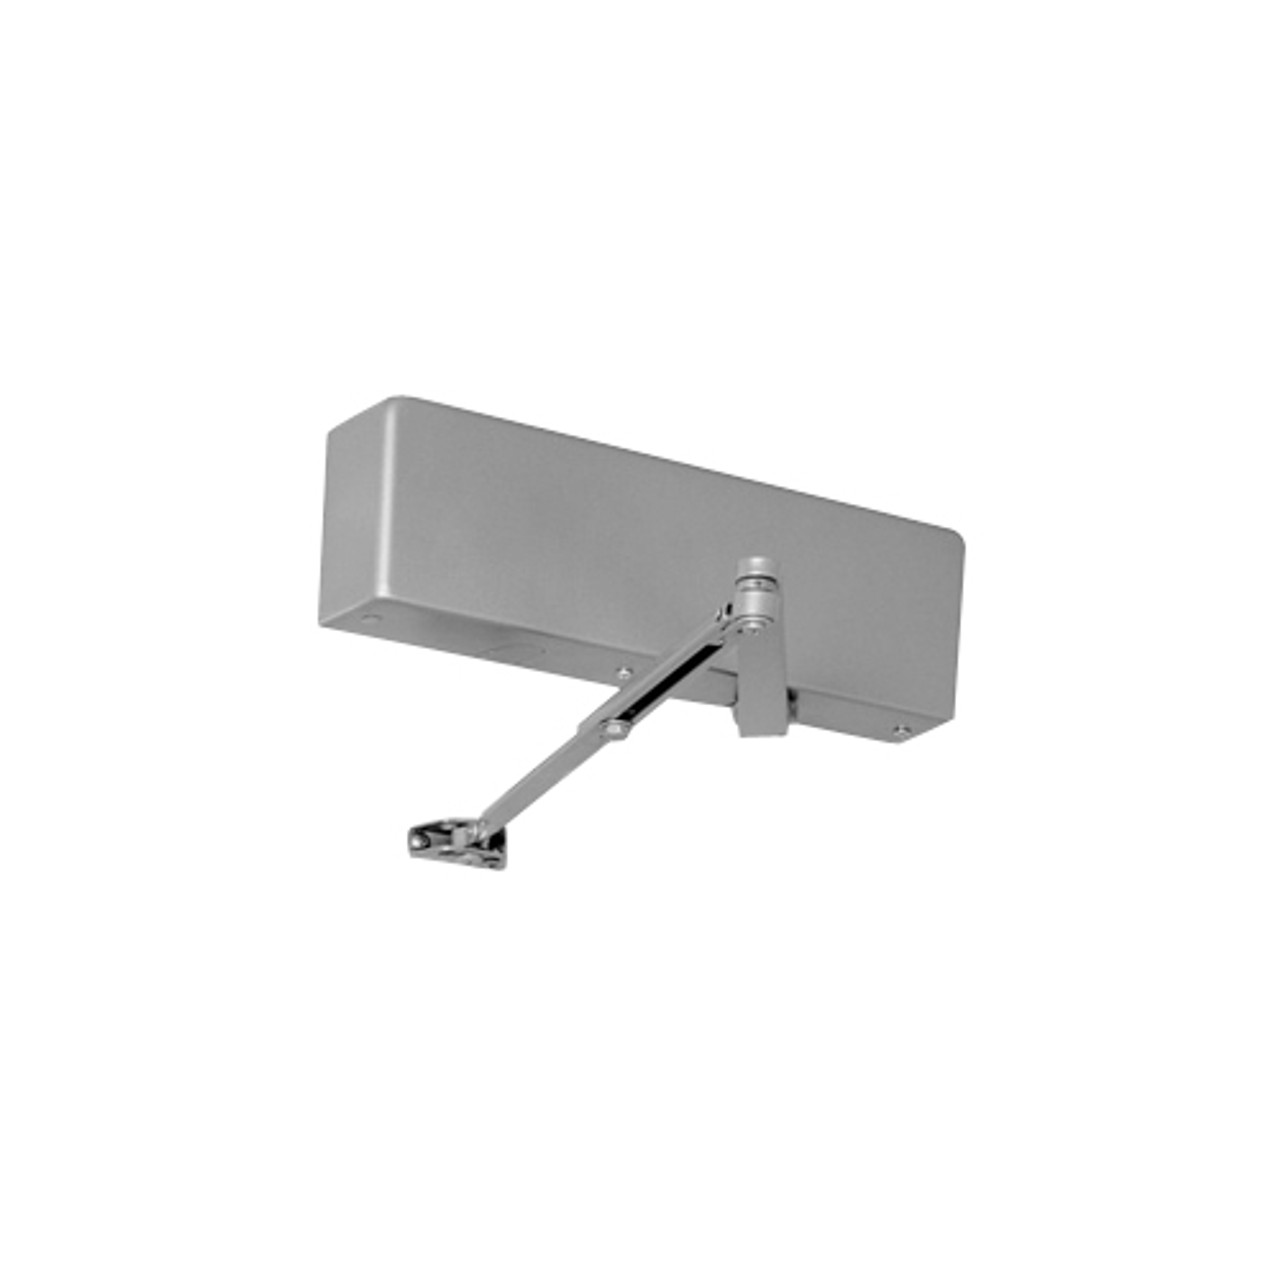 J7500H-689 Norton 7500 Series Hold Open Institutional Door Closer with Top Jamb Only Reveals 2-3/4 to 6-3/4 inch to 150 Degree in Aluminum Finish